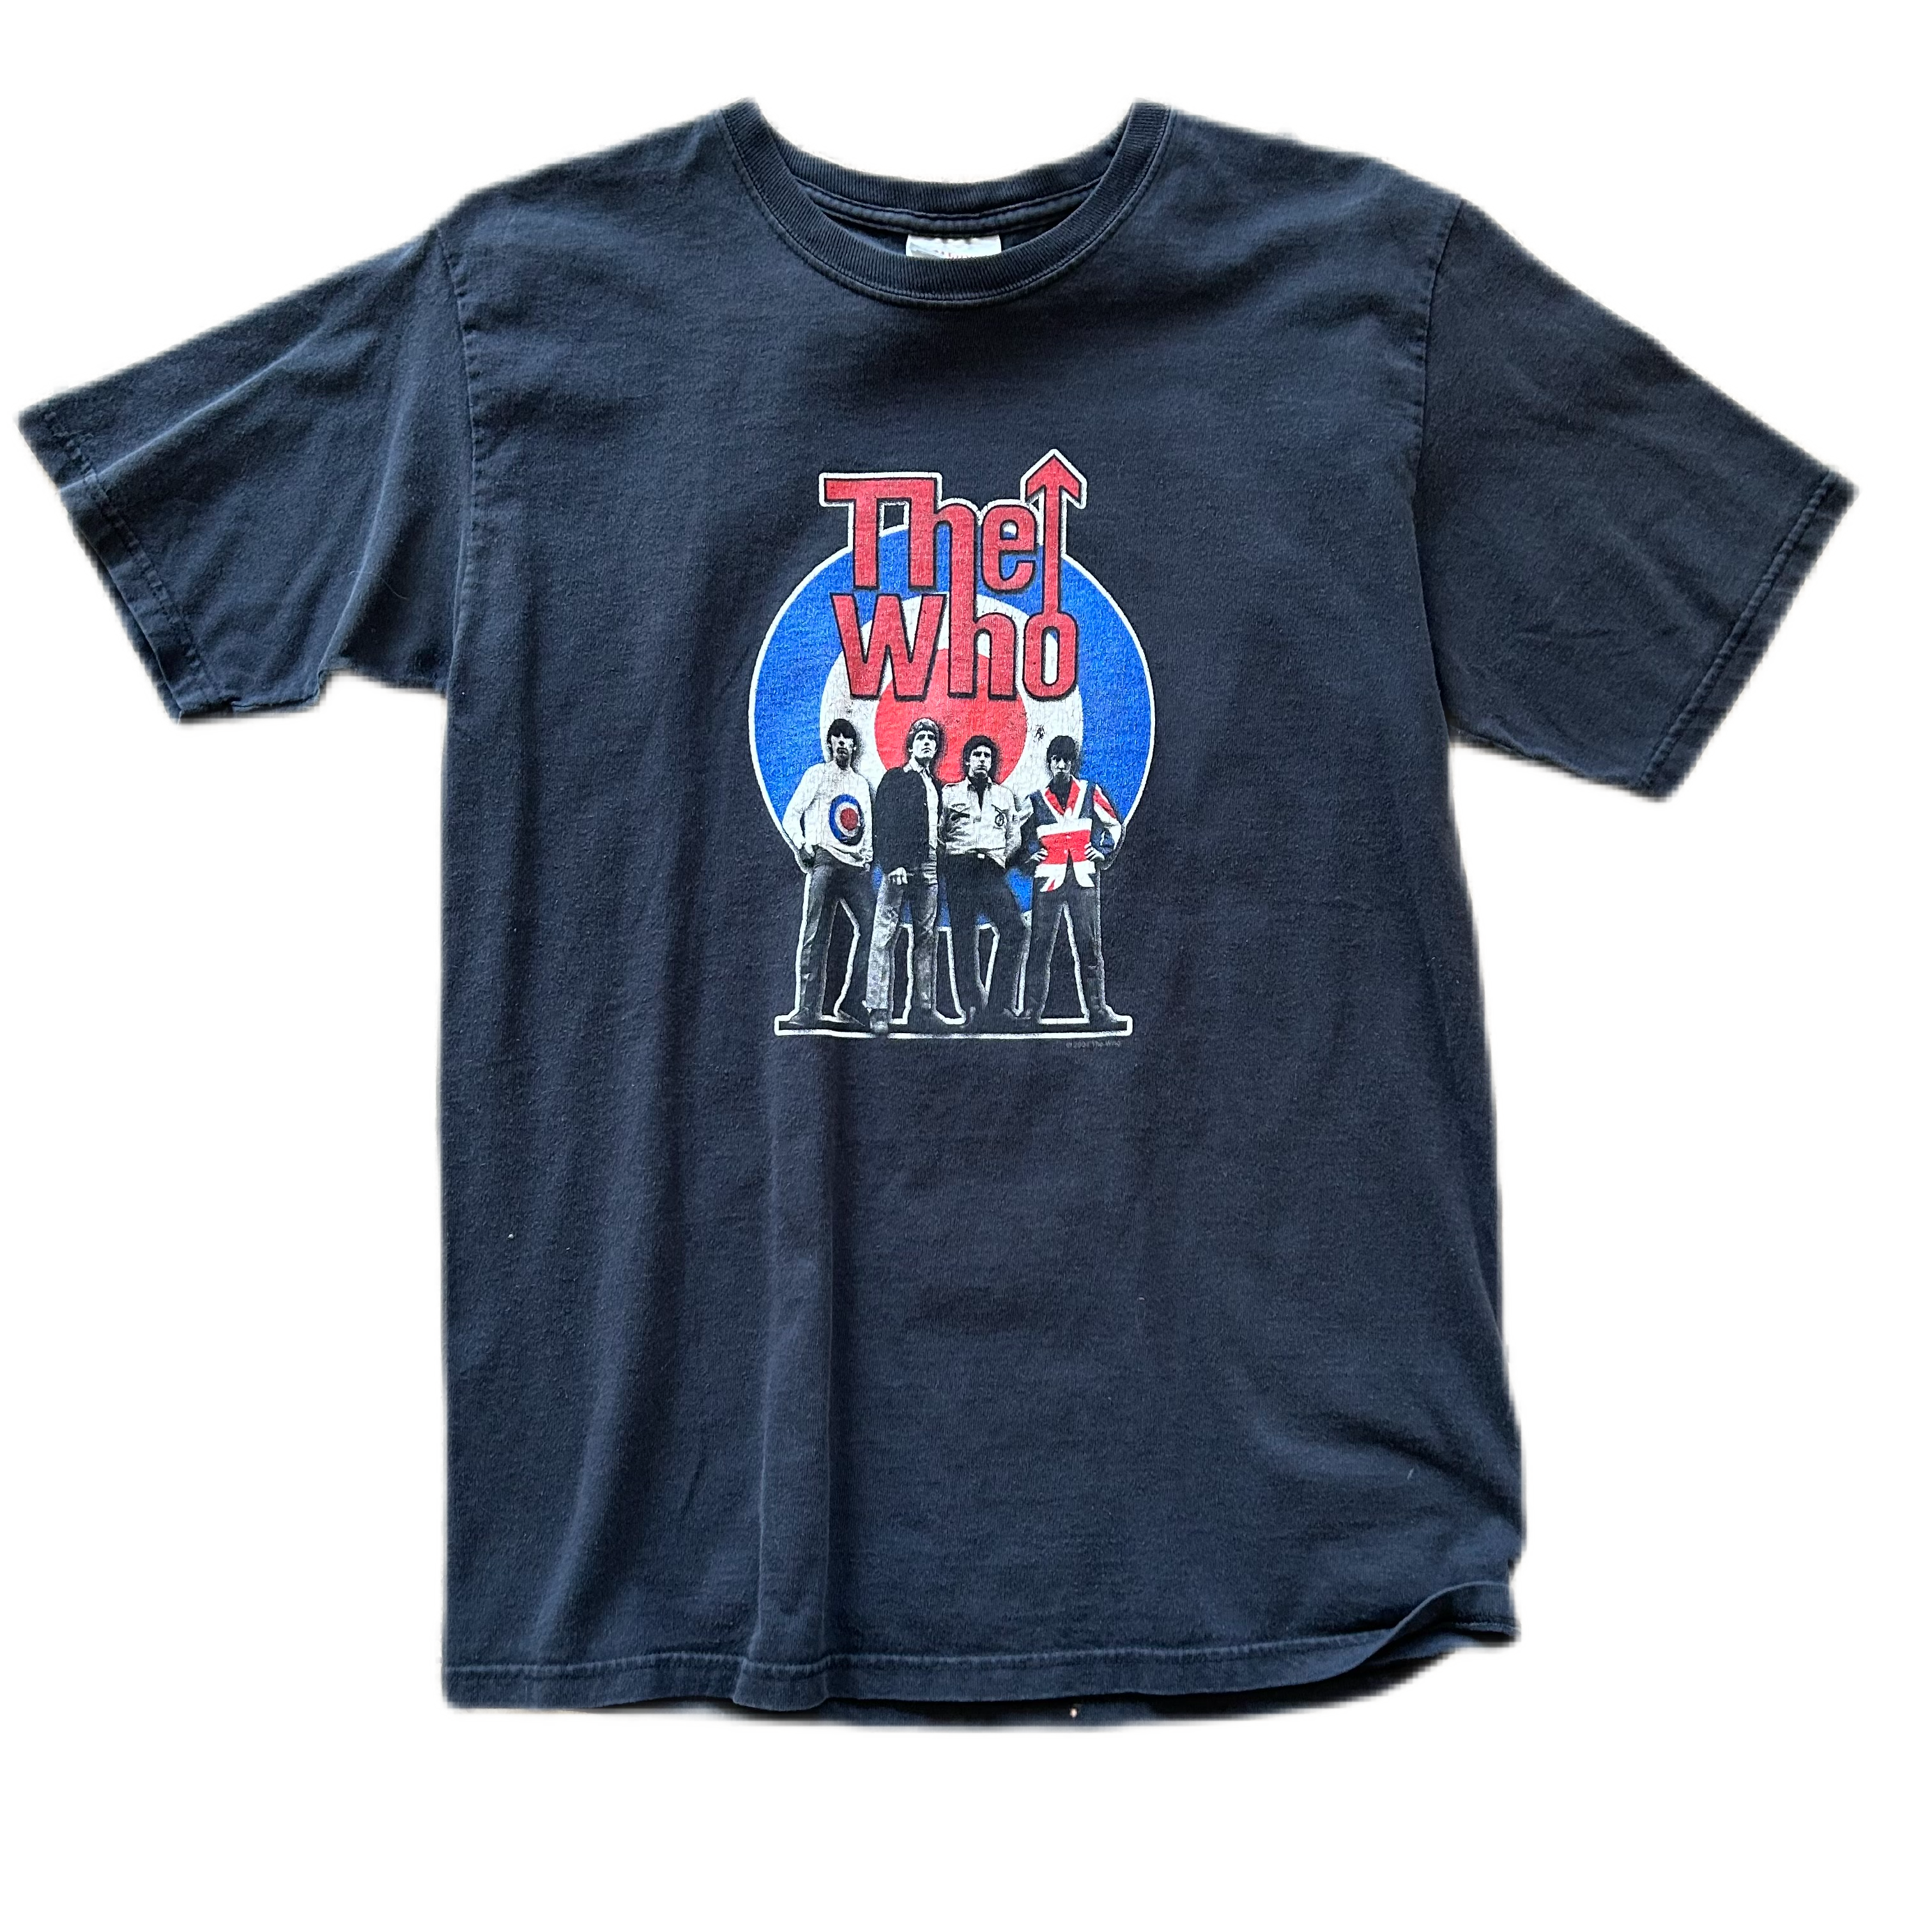 Vintage 2000s The Who Tee